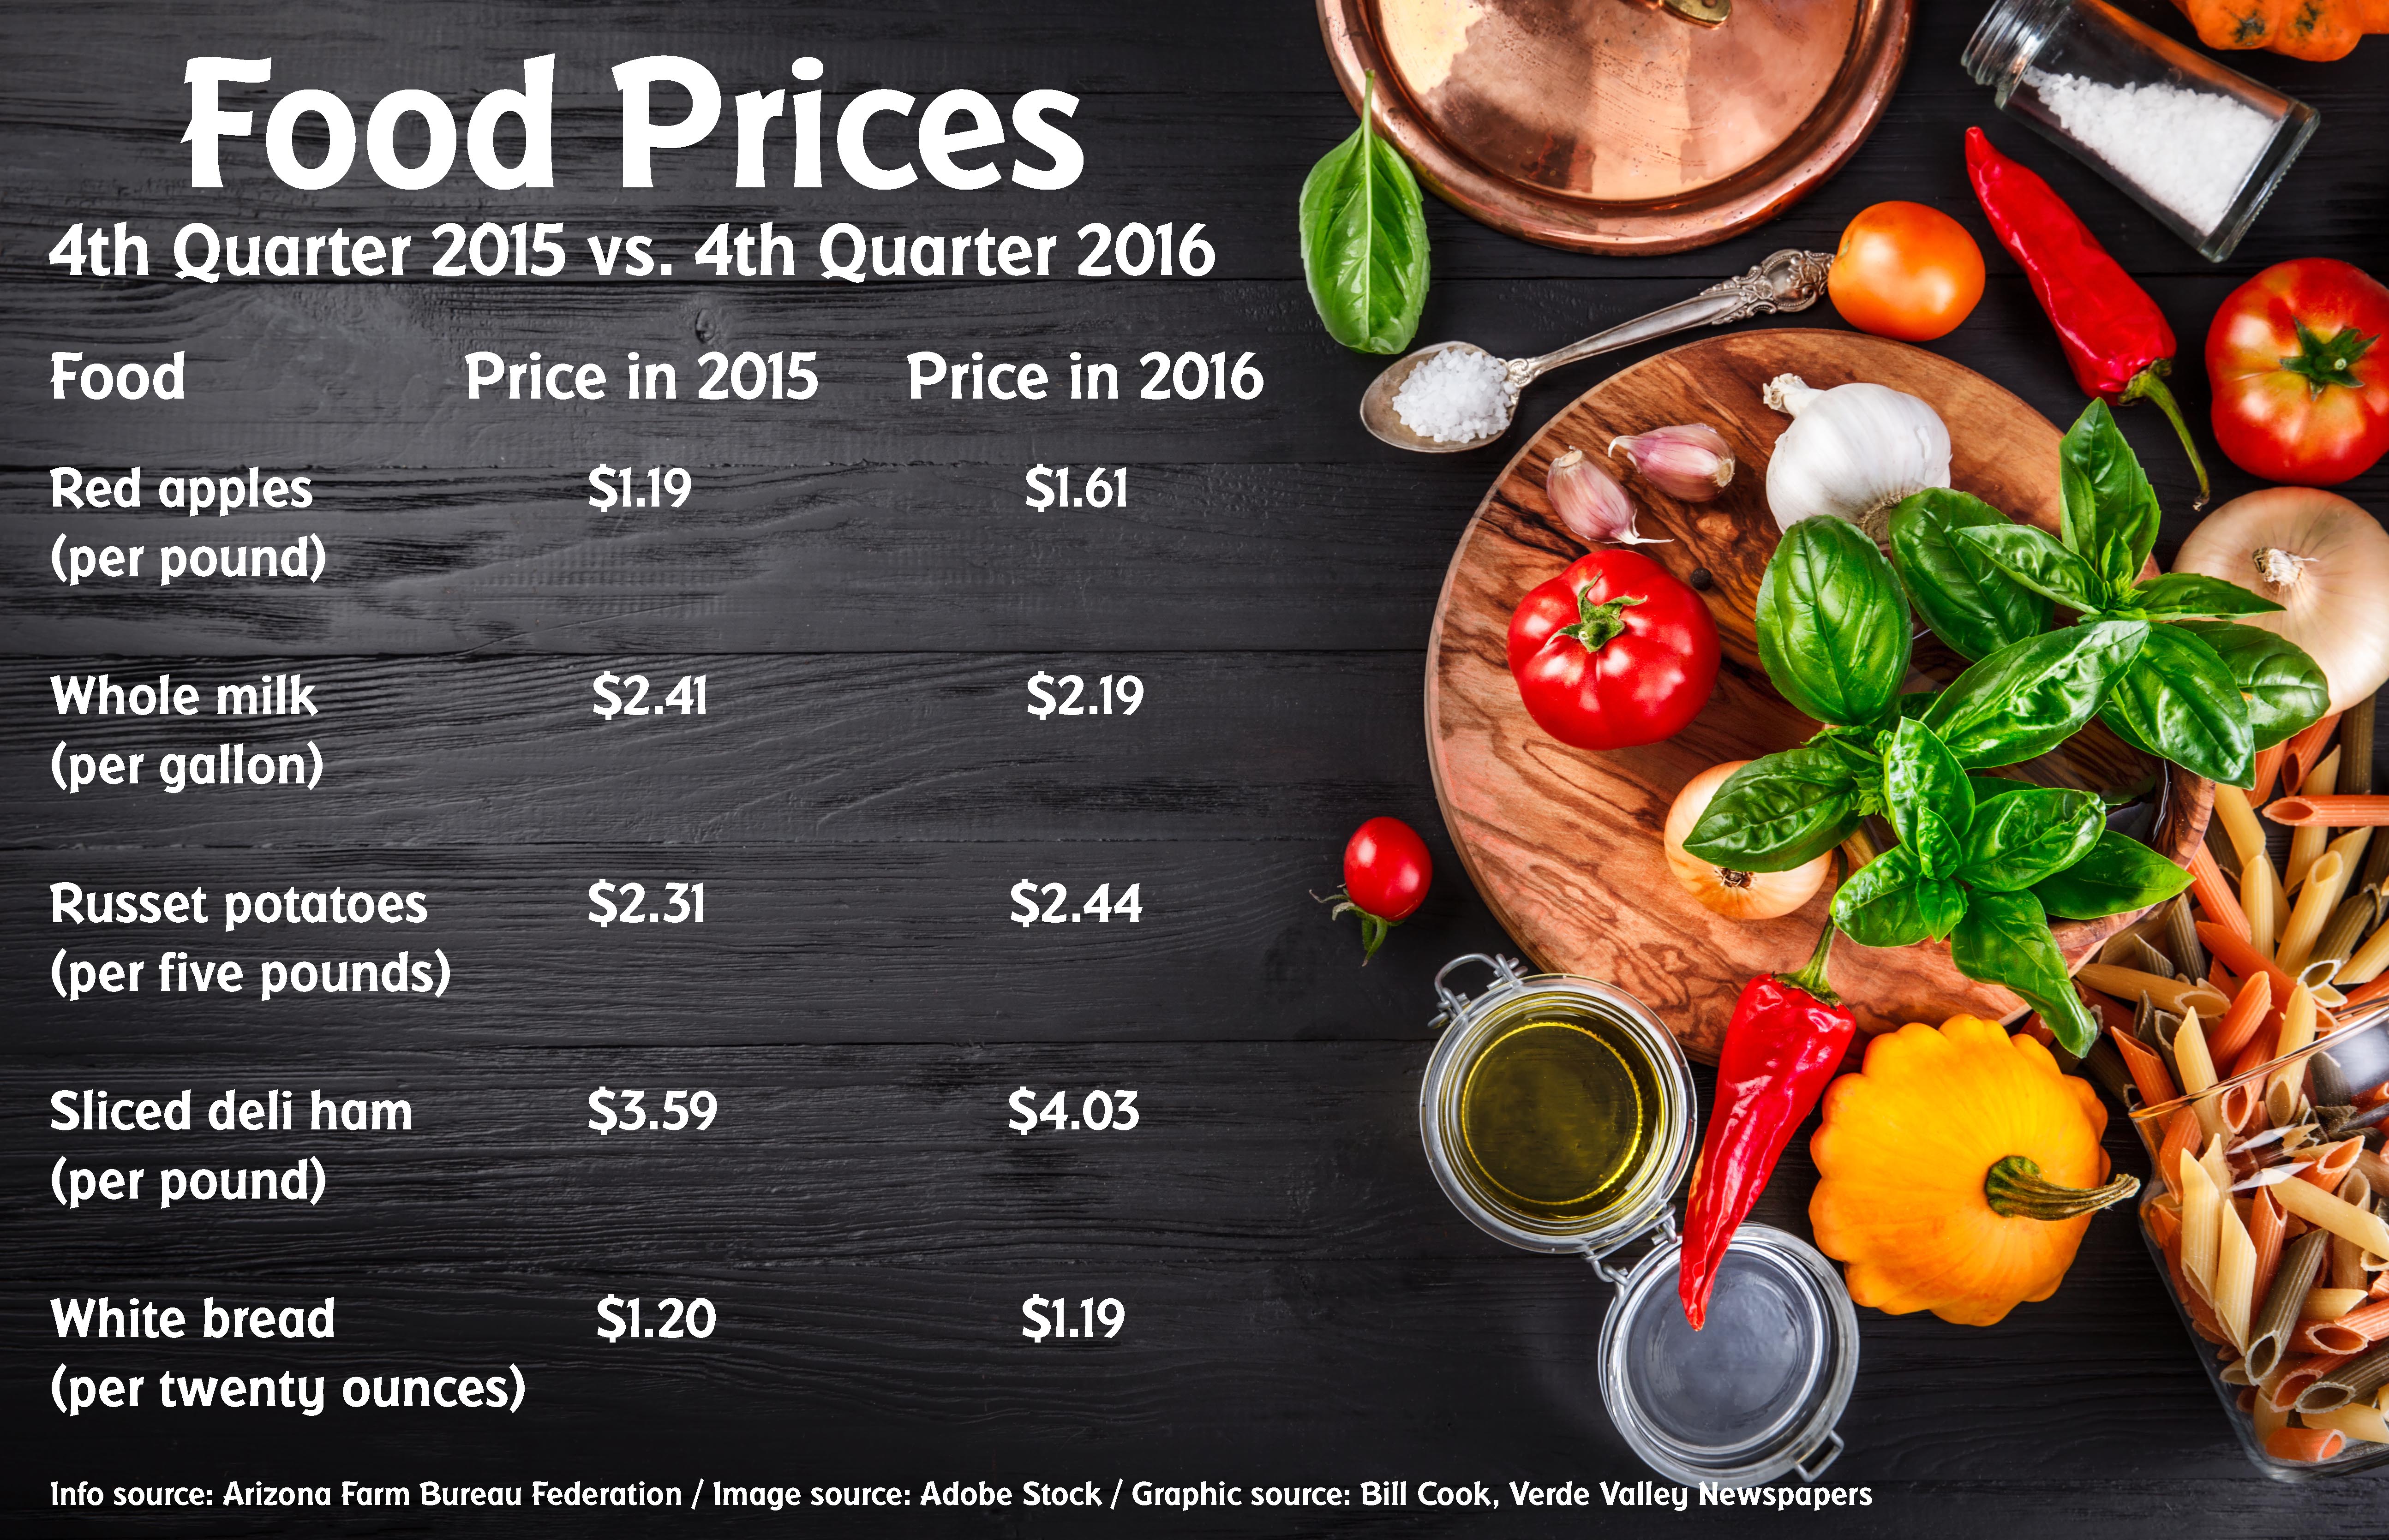 Cook special food перевод. Food Prices. Prices on food. Food Price pounds. Food products Prices.